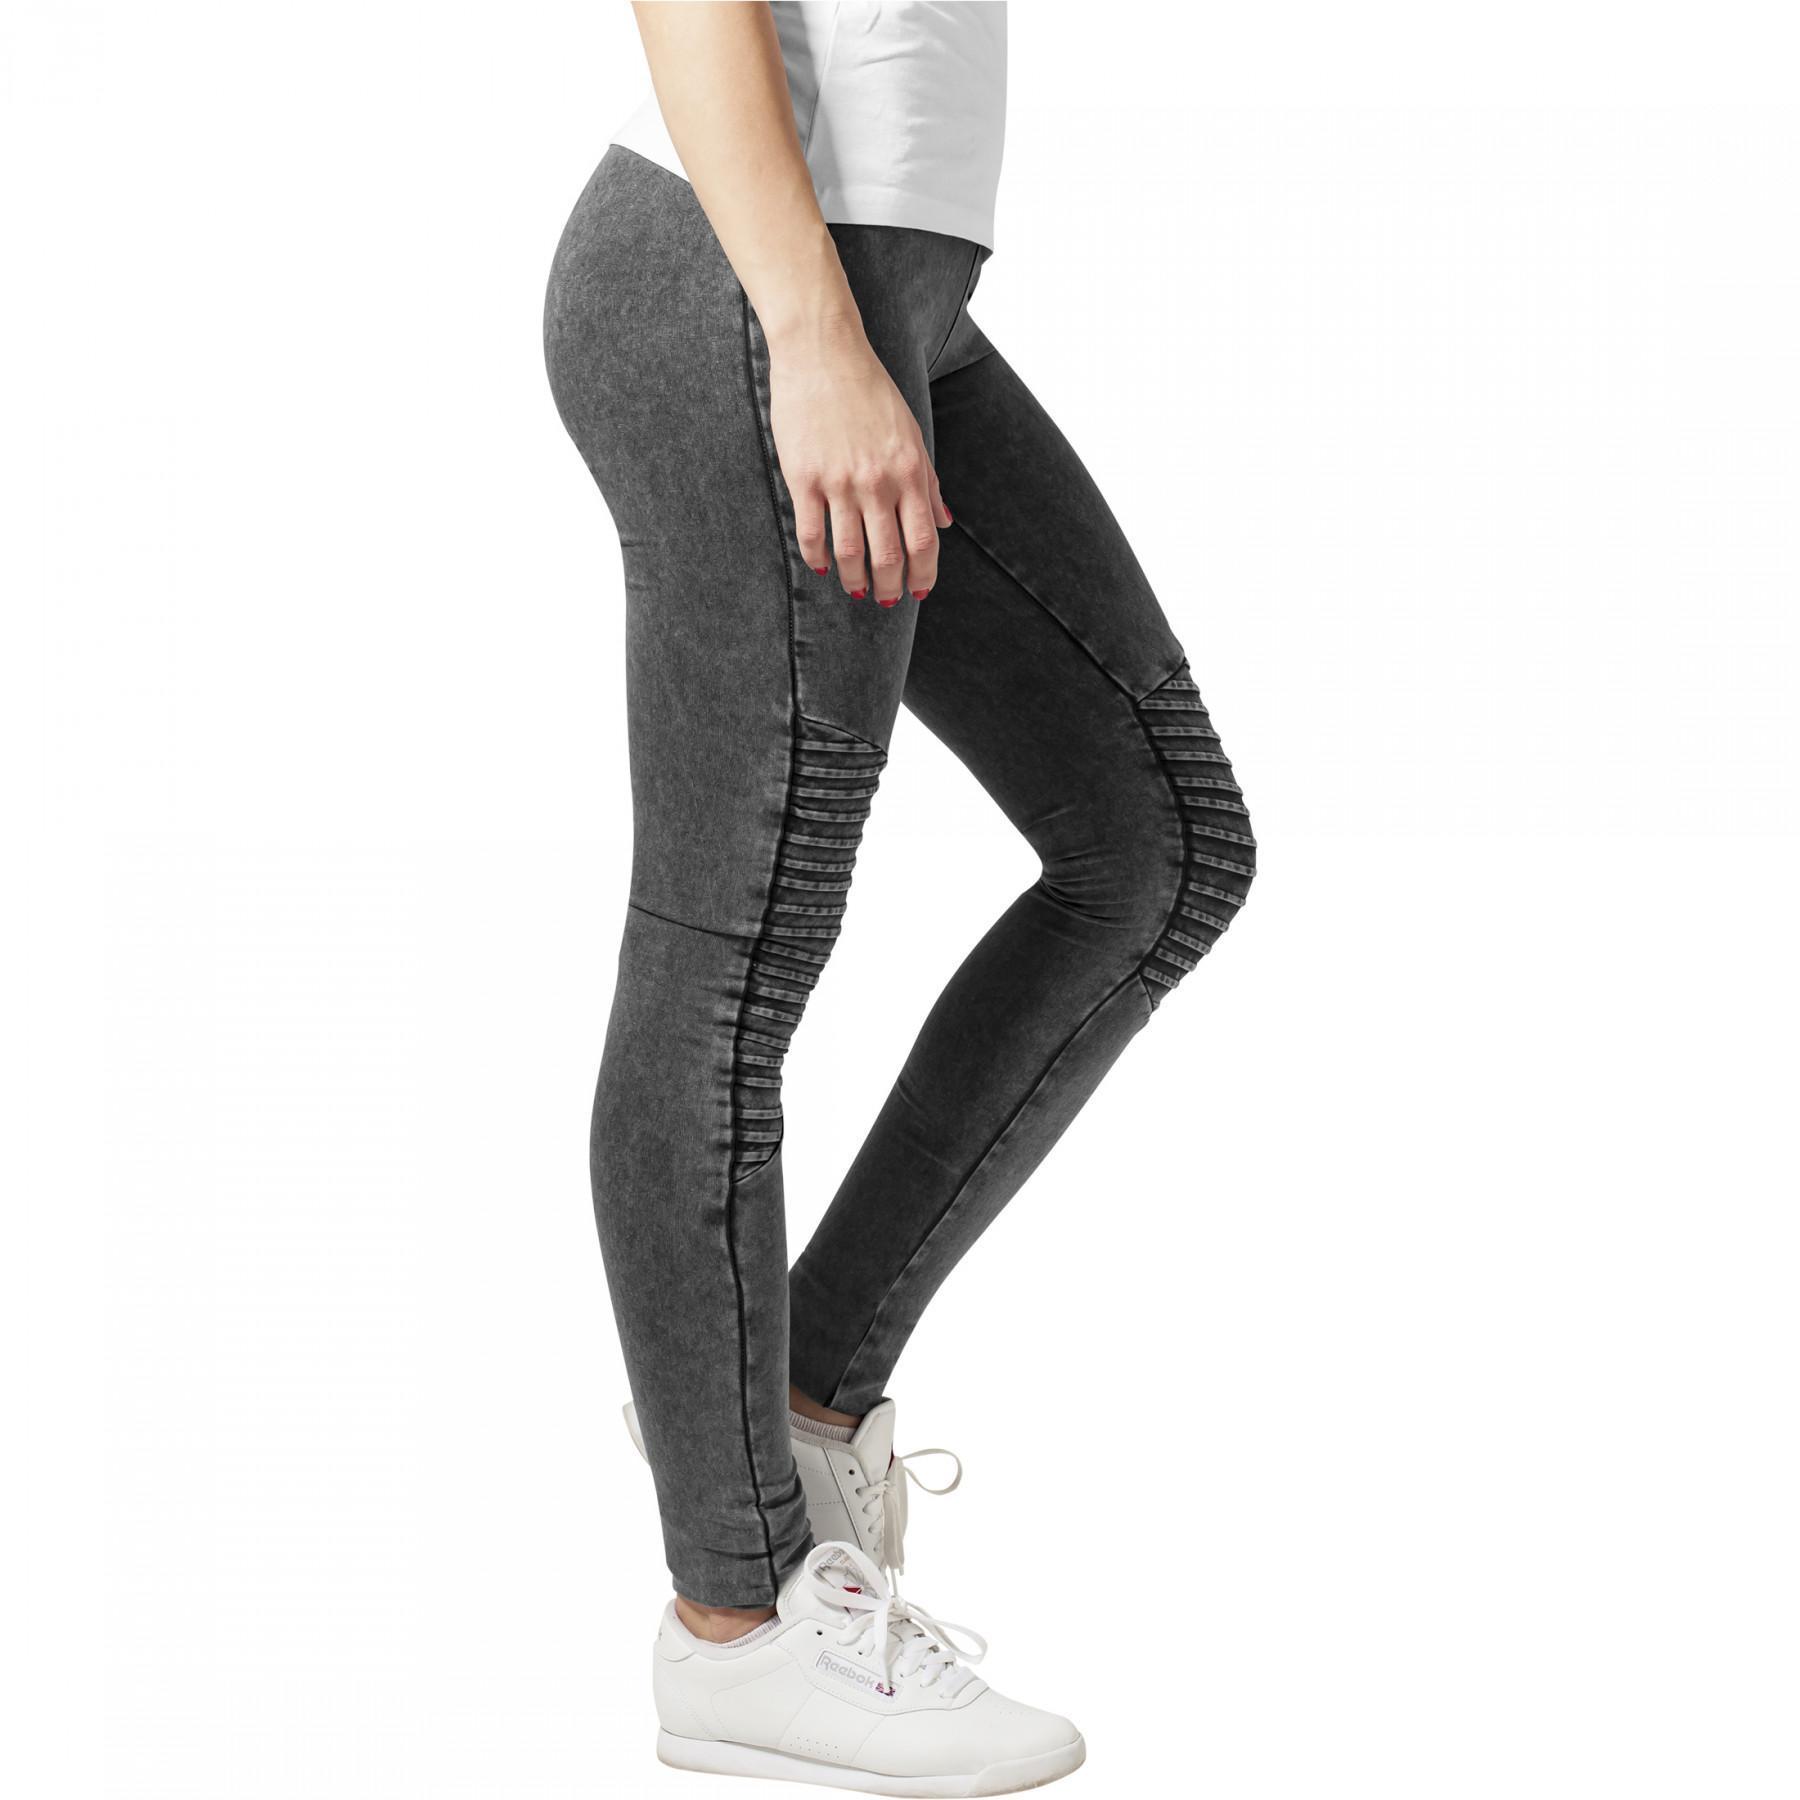 Women's Urban Classic denim leggings - Trousers and Jeans - Woman -  Lifestyle